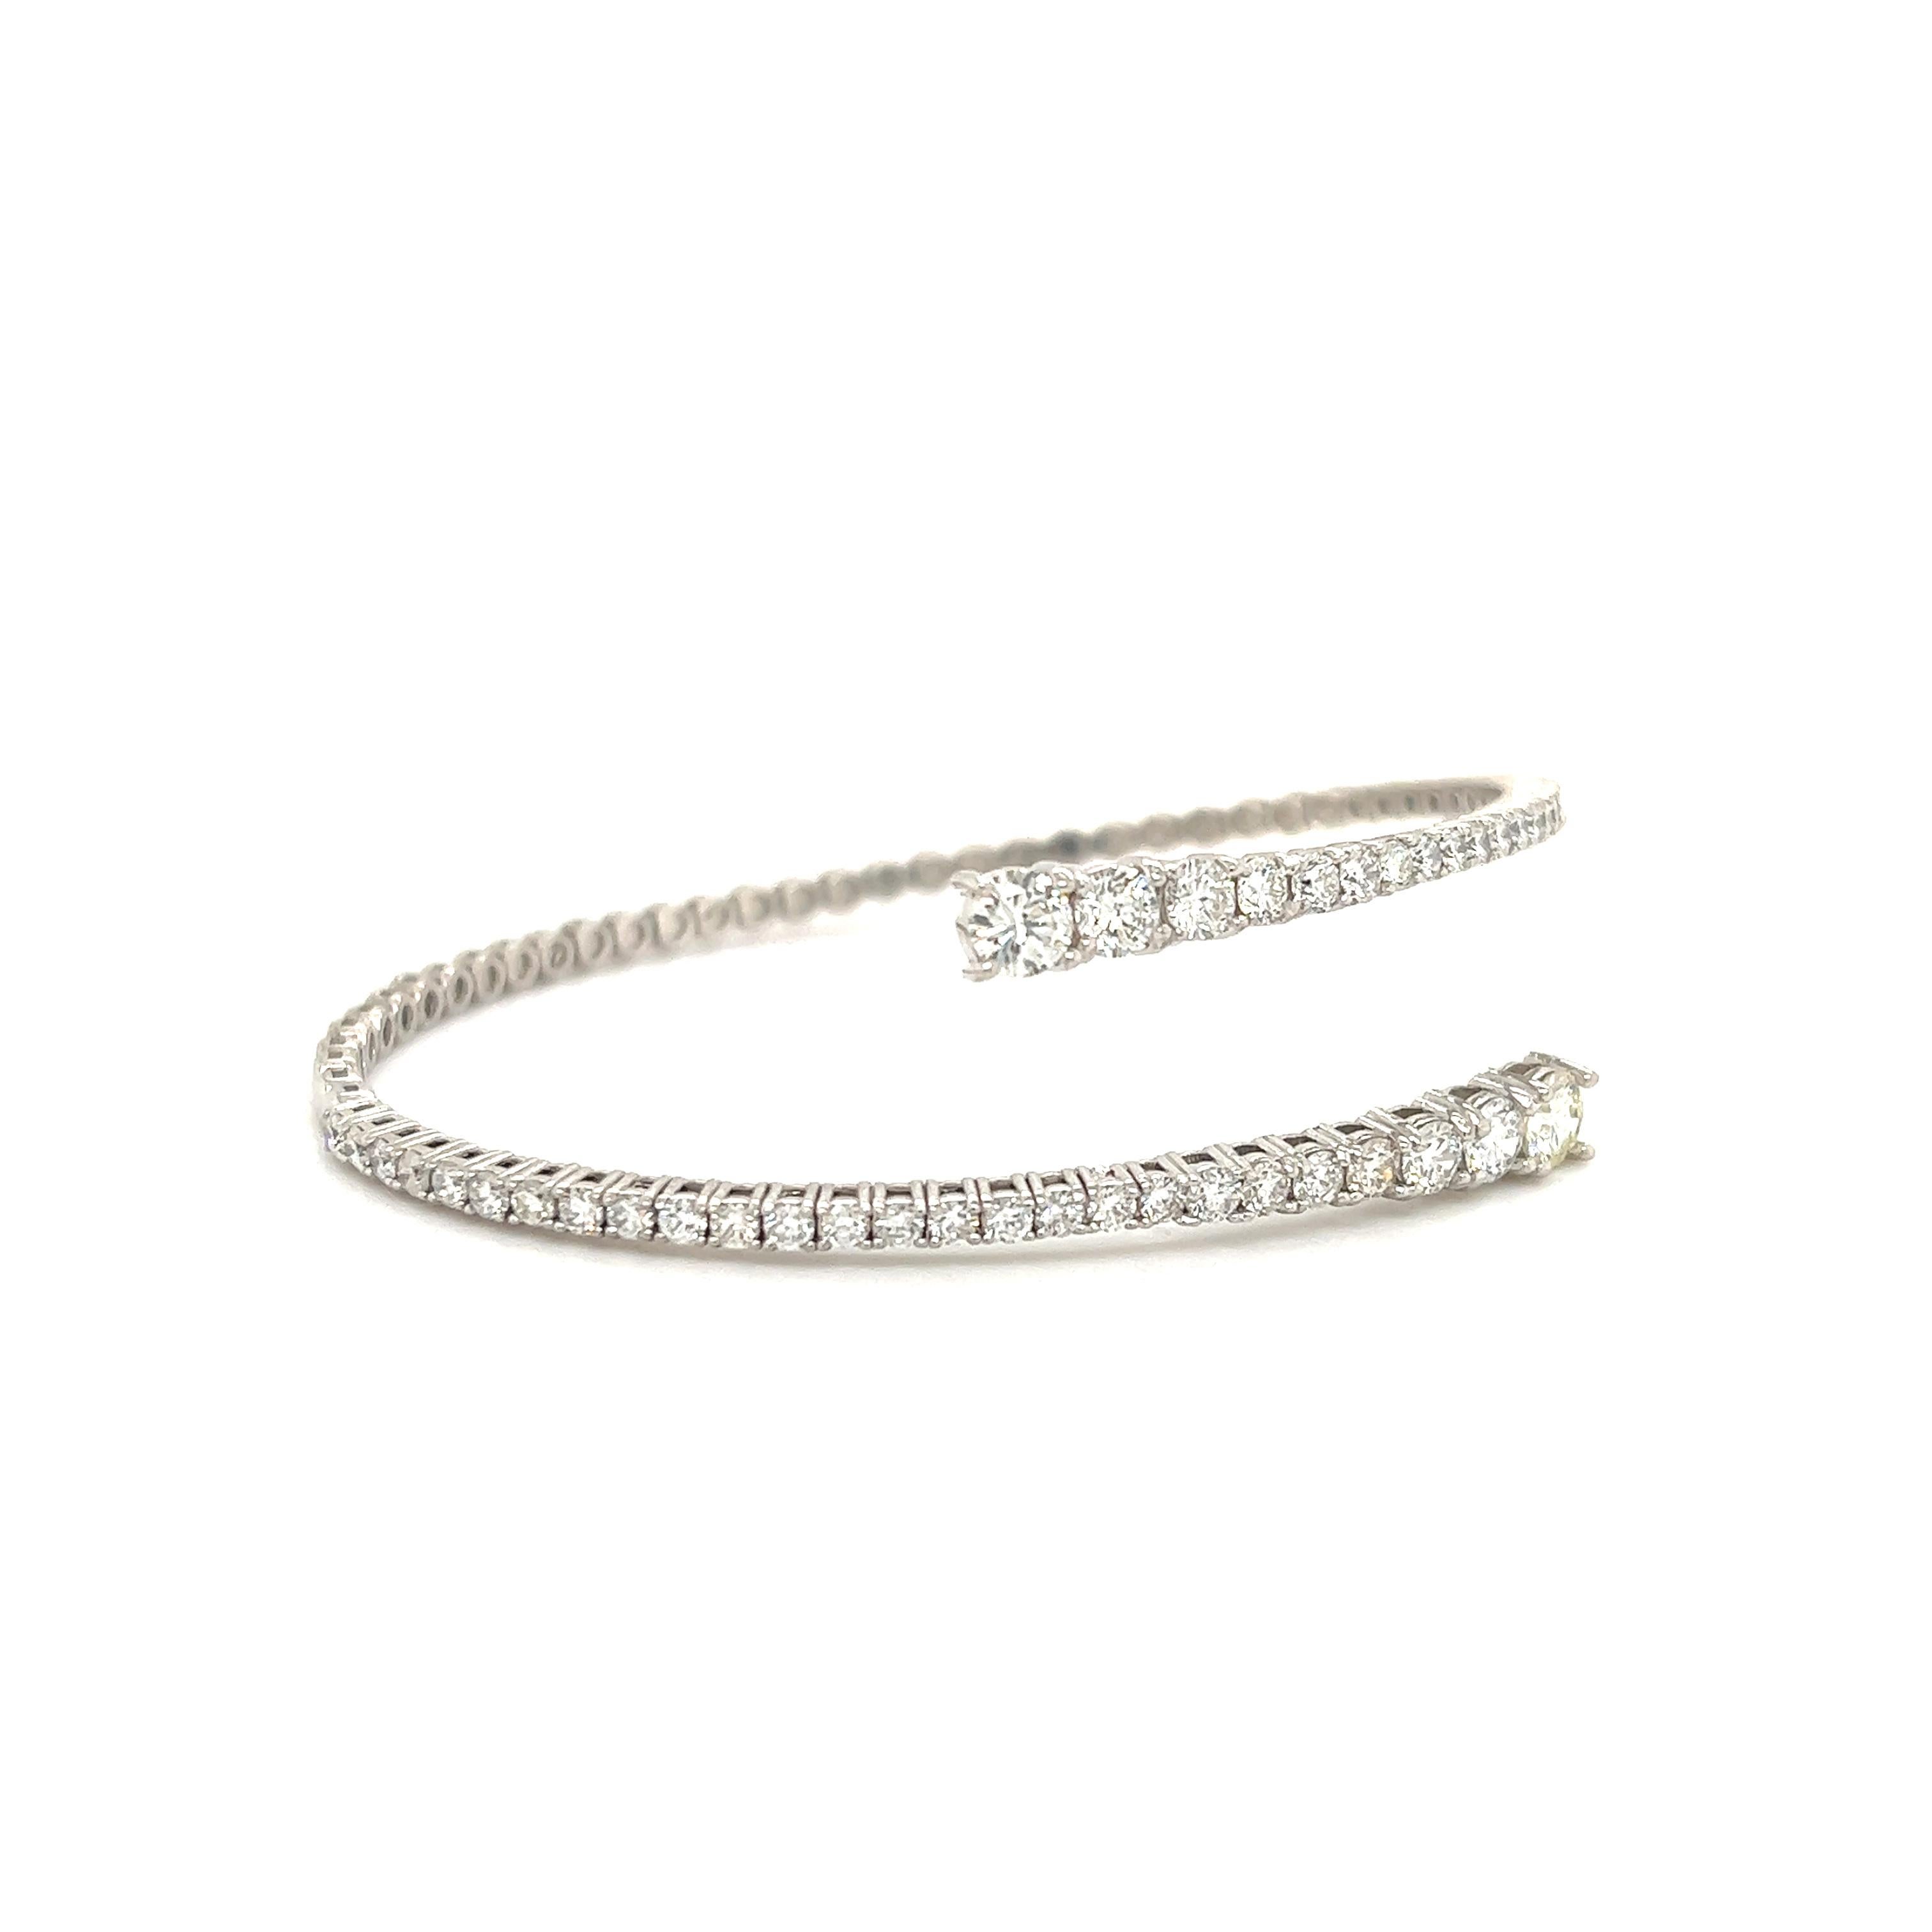 Fantastic creation crafted in house by us Roc Diamonds. The flex fit diamond bangle is crafted in 14k white gold. The bangle is flexible as the bottom portion has a spring design. The bangle is set with 3.36 ct. of natural round brilliant cut